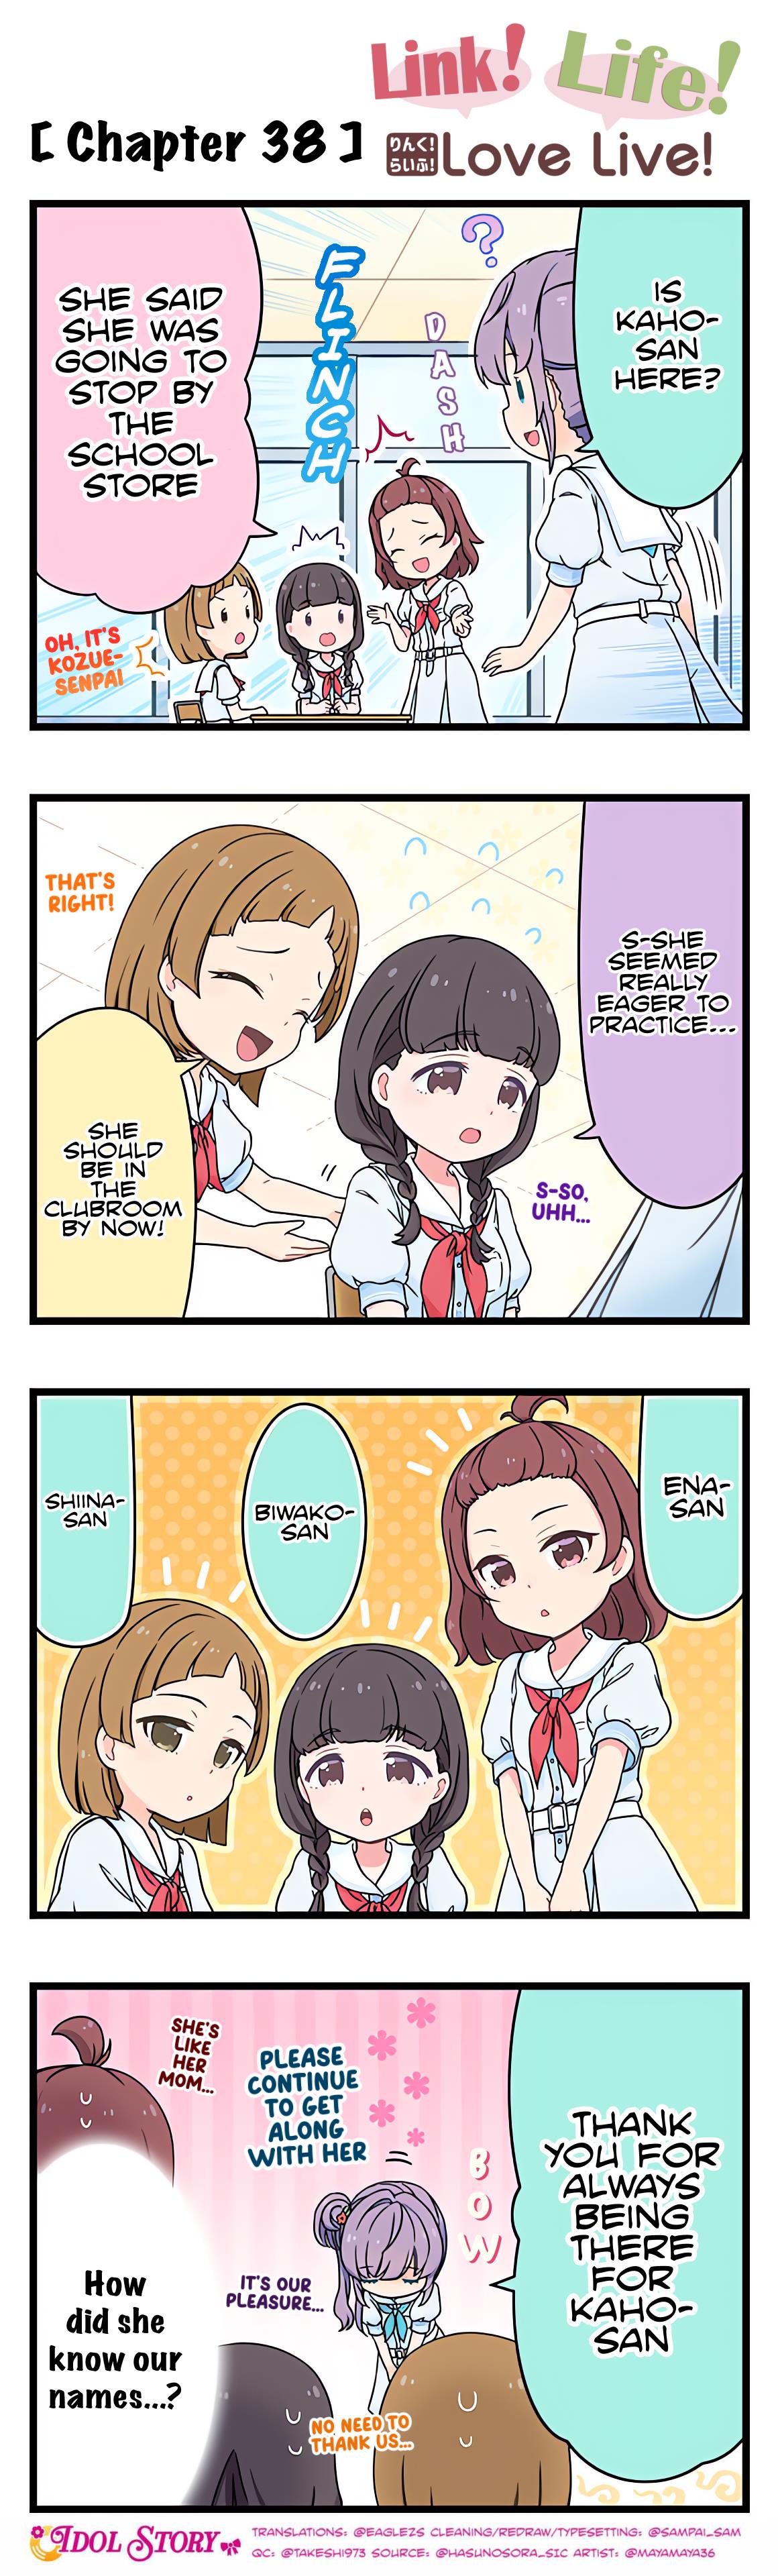 Link! Life! Love Live! Chapter 38 #1